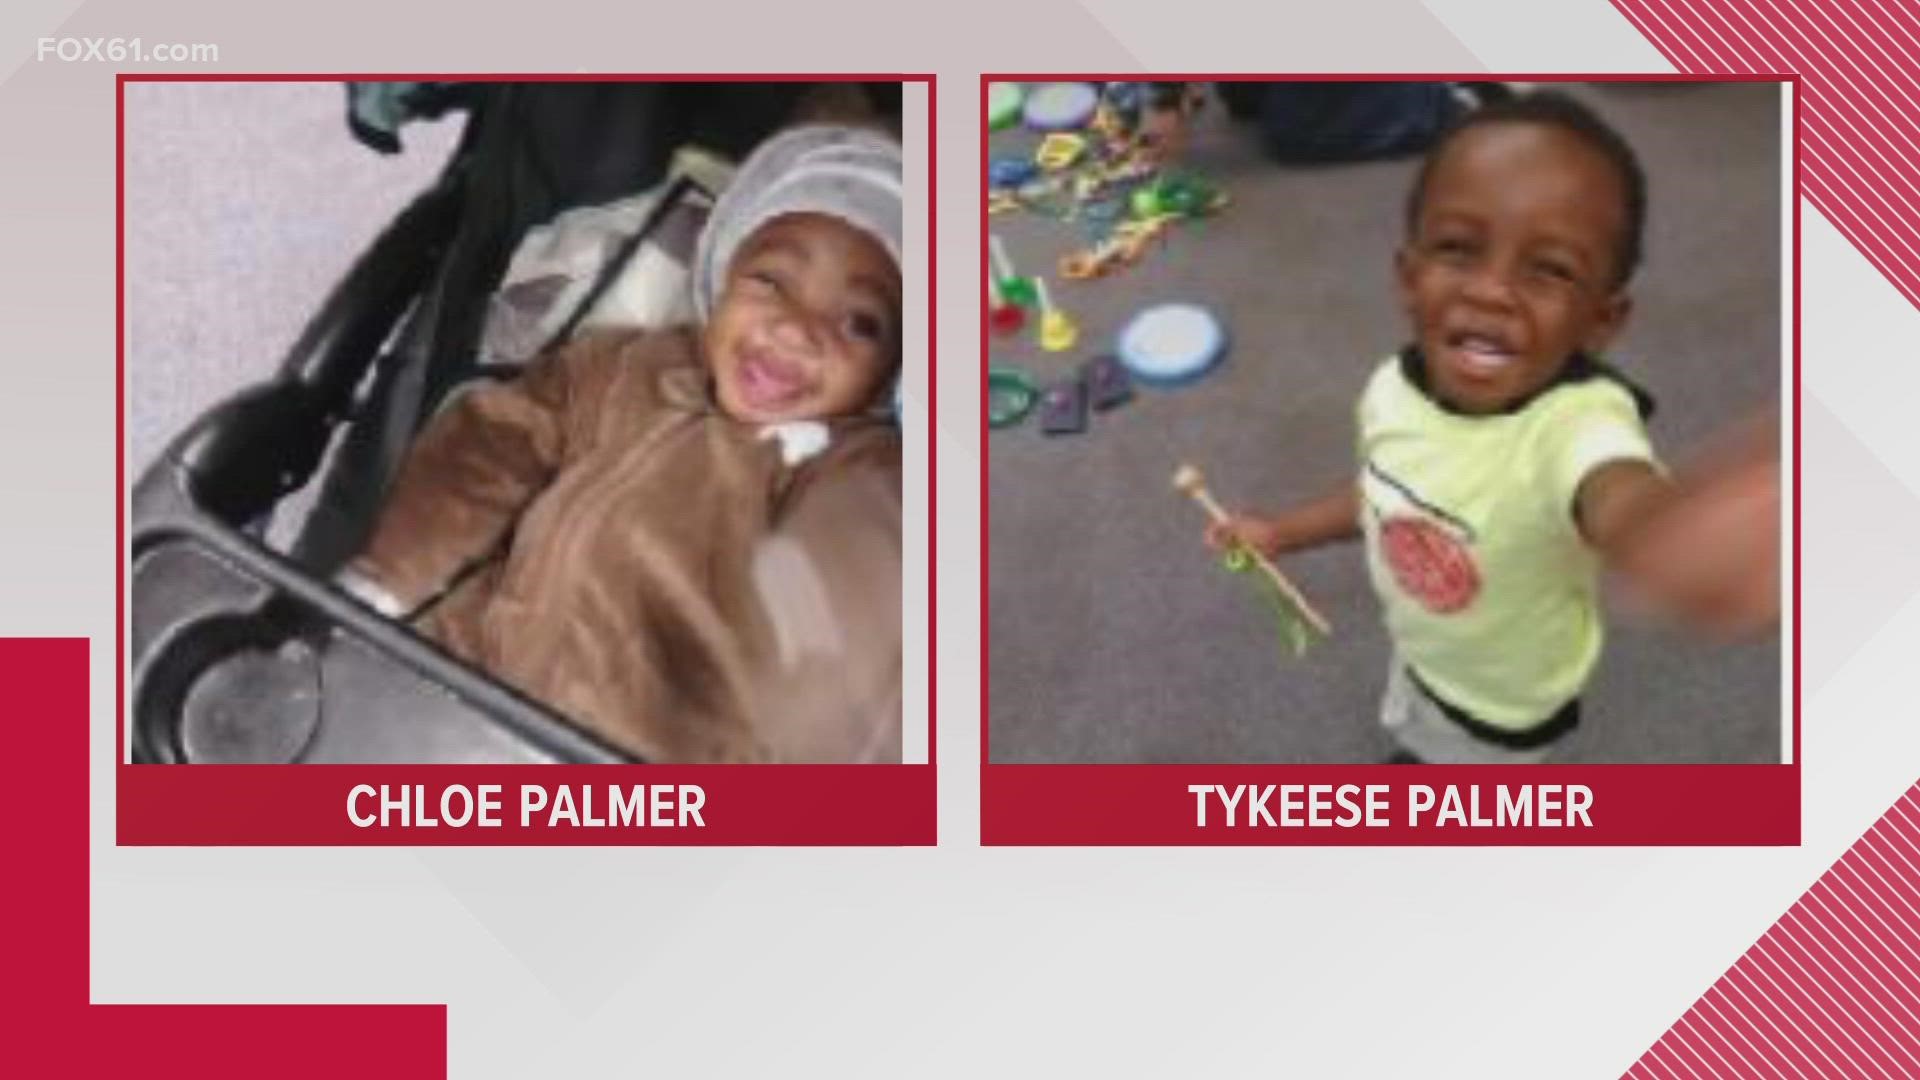 Both children have not been seen since March 1, according to police.